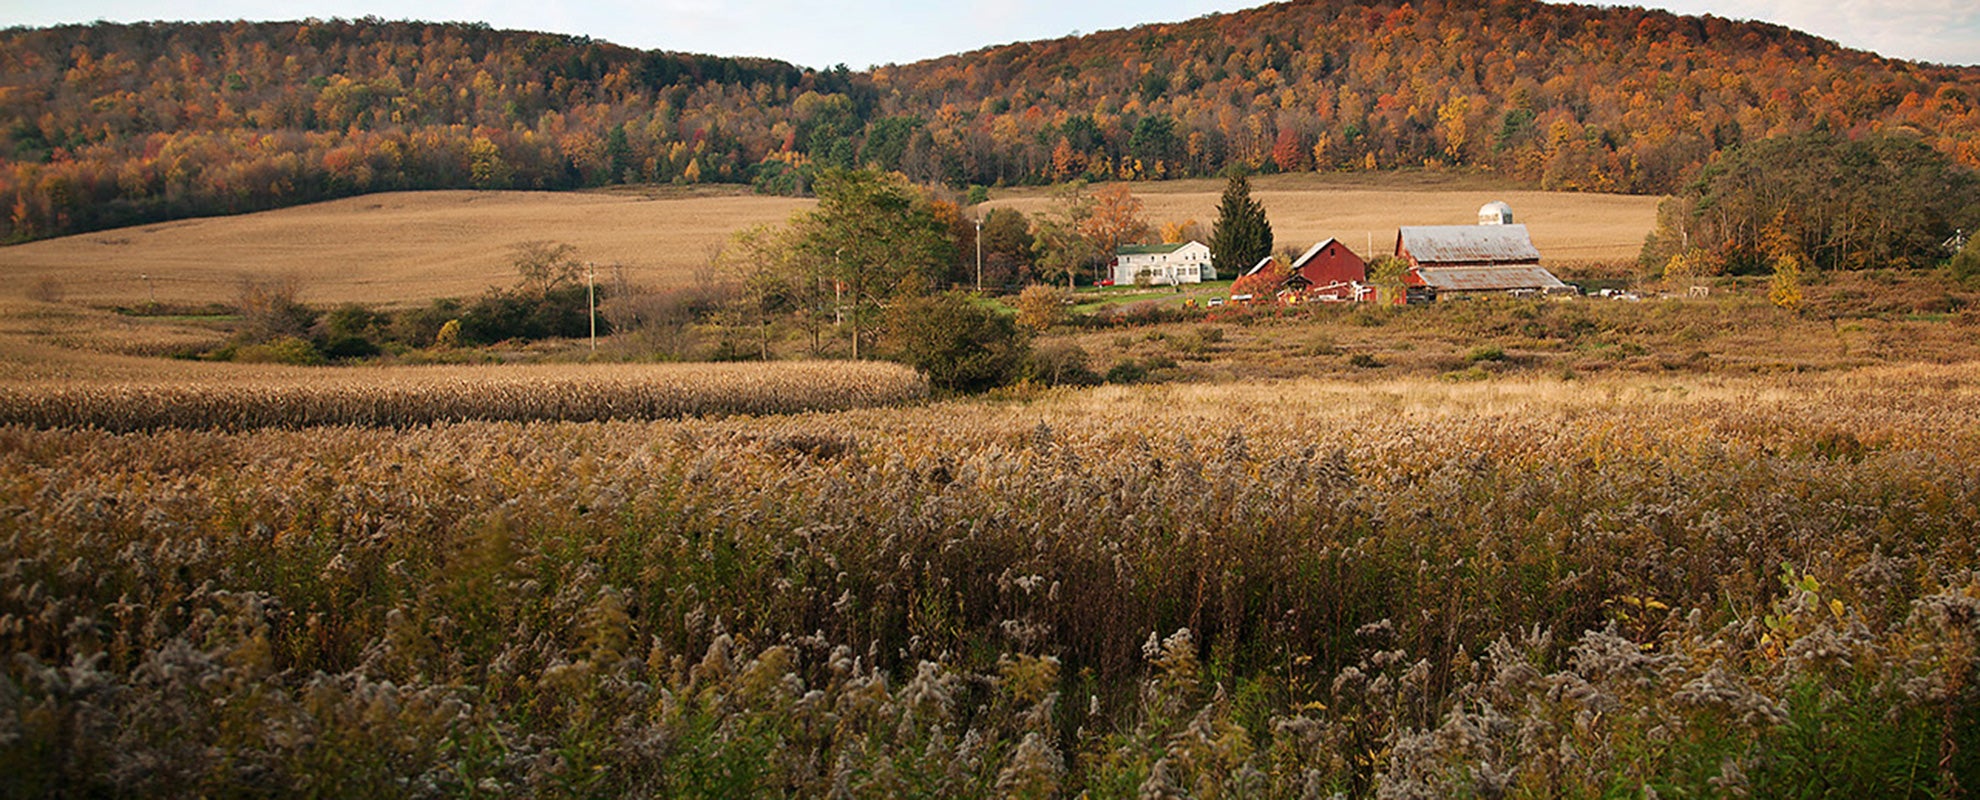 A farmhouse near the town of Dryden in upstate New York.